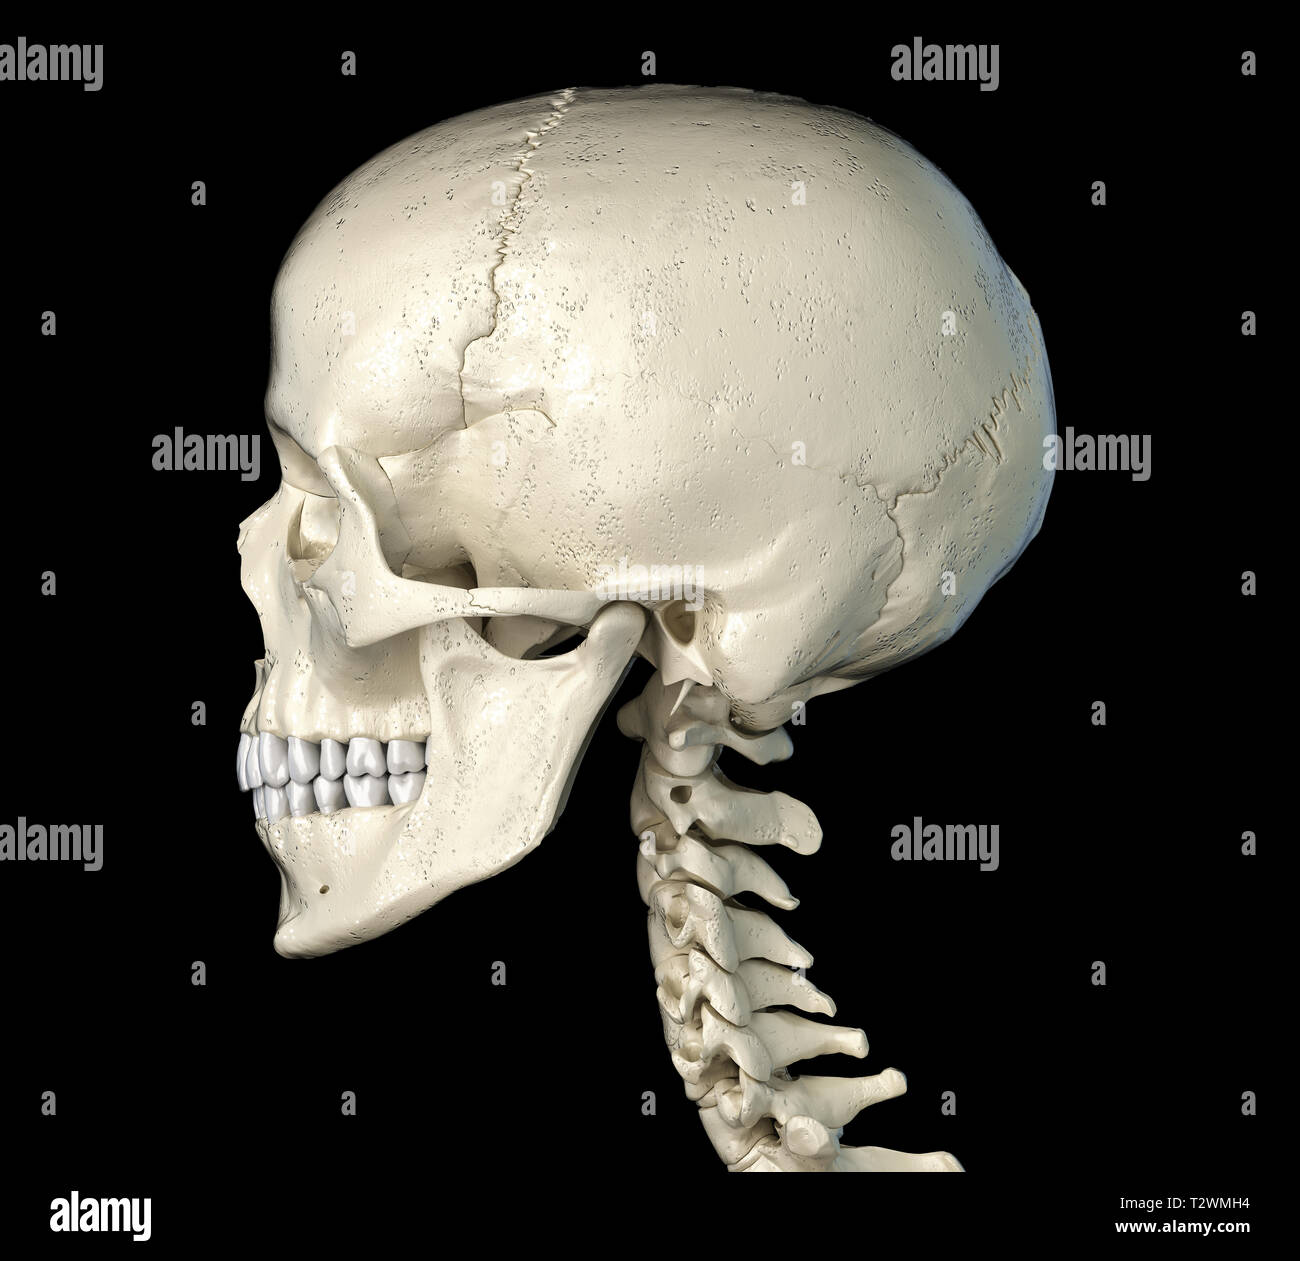 Human skull  viewed from a side. On black background. Stock Photo